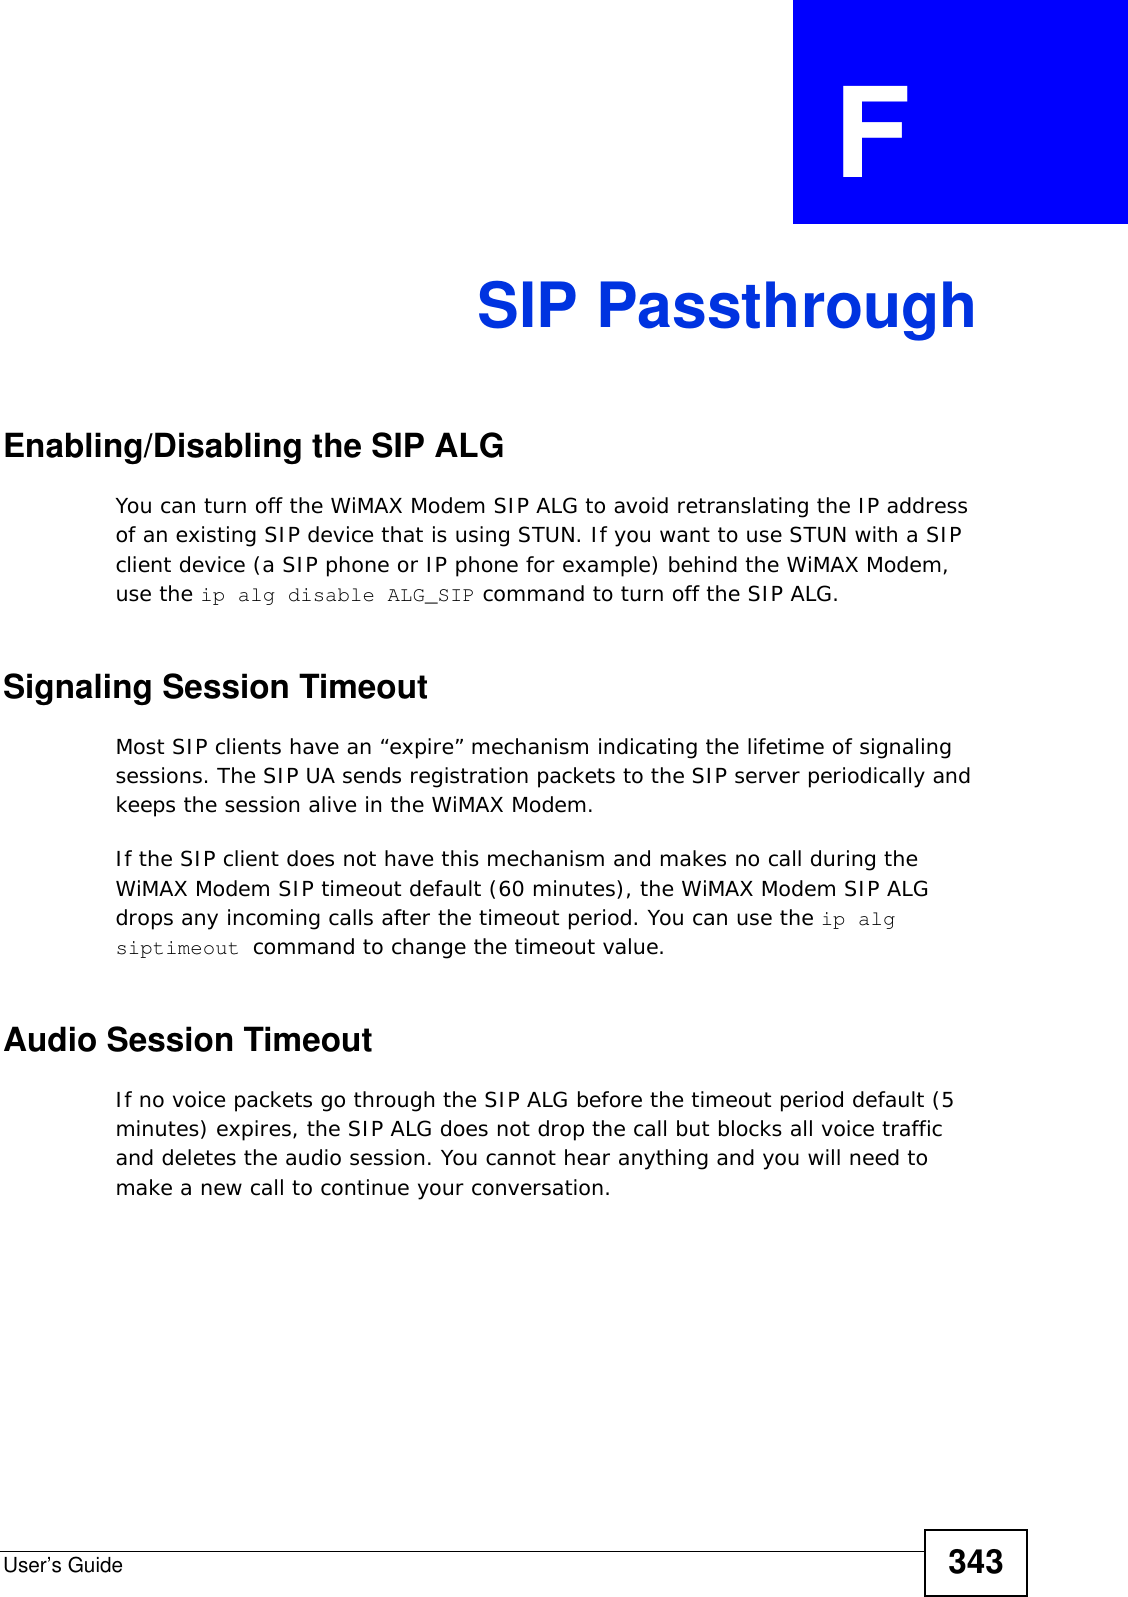 User’s Guide 343APPENDIX  F  SIP PassthroughEnabling/Disabling the SIP ALGYou can turn off the WiMAX Modem SIP ALG to avoid retranslating the IP address of an existing SIP device that is using STUN. If you want to use STUN with a SIP client device (a SIP phone or IP phone for example) behind the WiMAX Modem, use the ip alg disable ALG_SIP command to turn off the SIP ALG.Signaling Session TimeoutMost SIP clients have an “expire” mechanism indicating the lifetime of signaling sessions. The SIP UA sends registration packets to the SIP server periodically and keeps the session alive in the WiMAX Modem. If the SIP client does not have this mechanism and makes no call during the WiMAX Modem SIP timeout default (60 minutes), the WiMAX Modem SIP ALG drops any incoming calls after the timeout period. You can use the ip alg siptimeout command to change the timeout value.Audio Session TimeoutIf no voice packets go through the SIP ALG before the timeout period default (5 minutes) expires, the SIP ALG does not drop the call but blocks all voice traffic and deletes the audio session. You cannot hear anything and you will need to make a new call to continue your conversation.